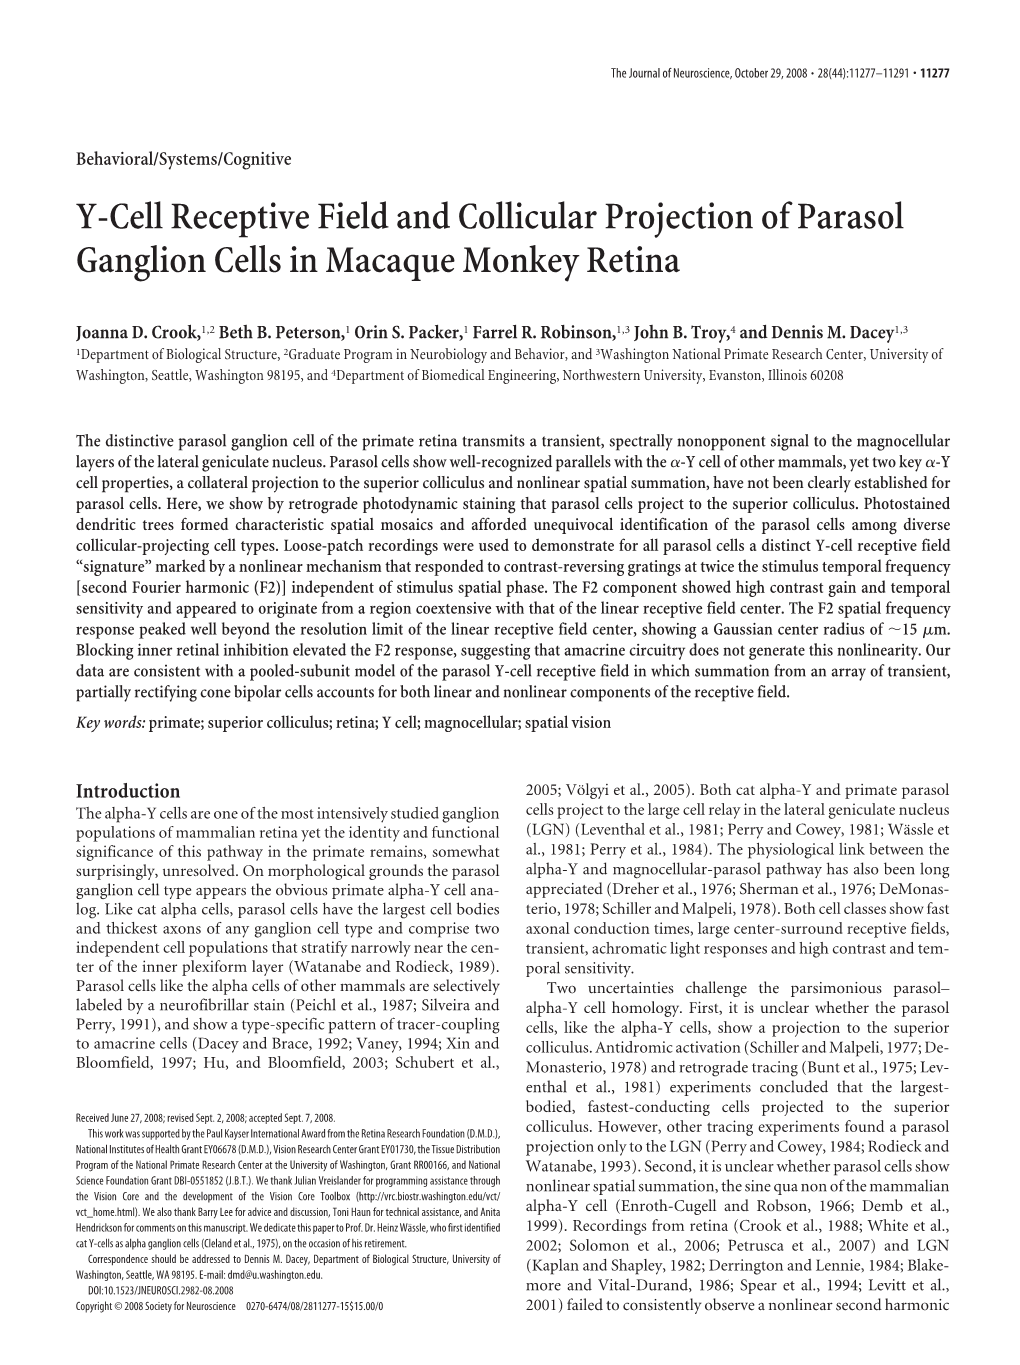 Y-Cell Receptive Field and Collicular Projection of Parasol Ganglion Cells in Macaque Monkey Retina